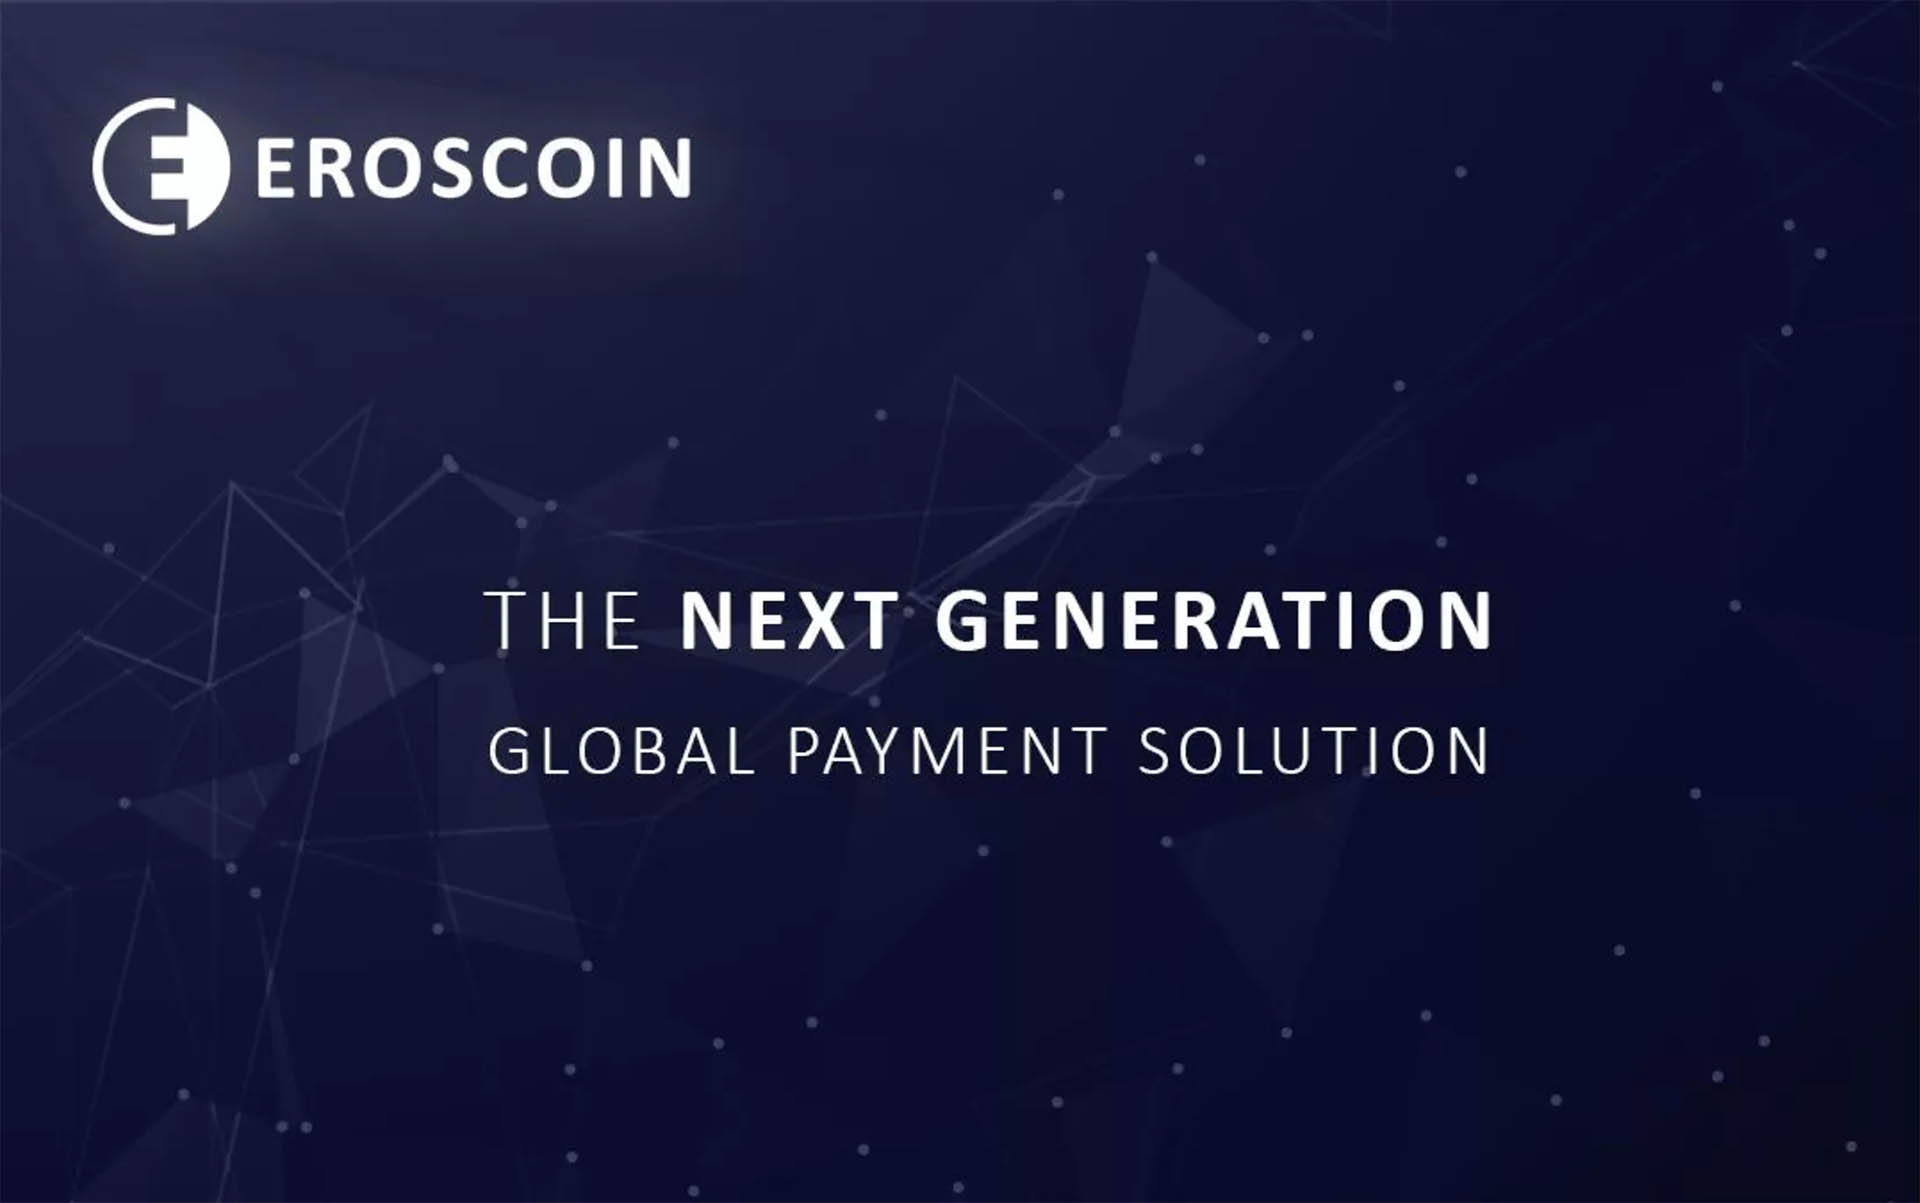 EROSCOIN Introduces a Next Generation Global Payment Solution